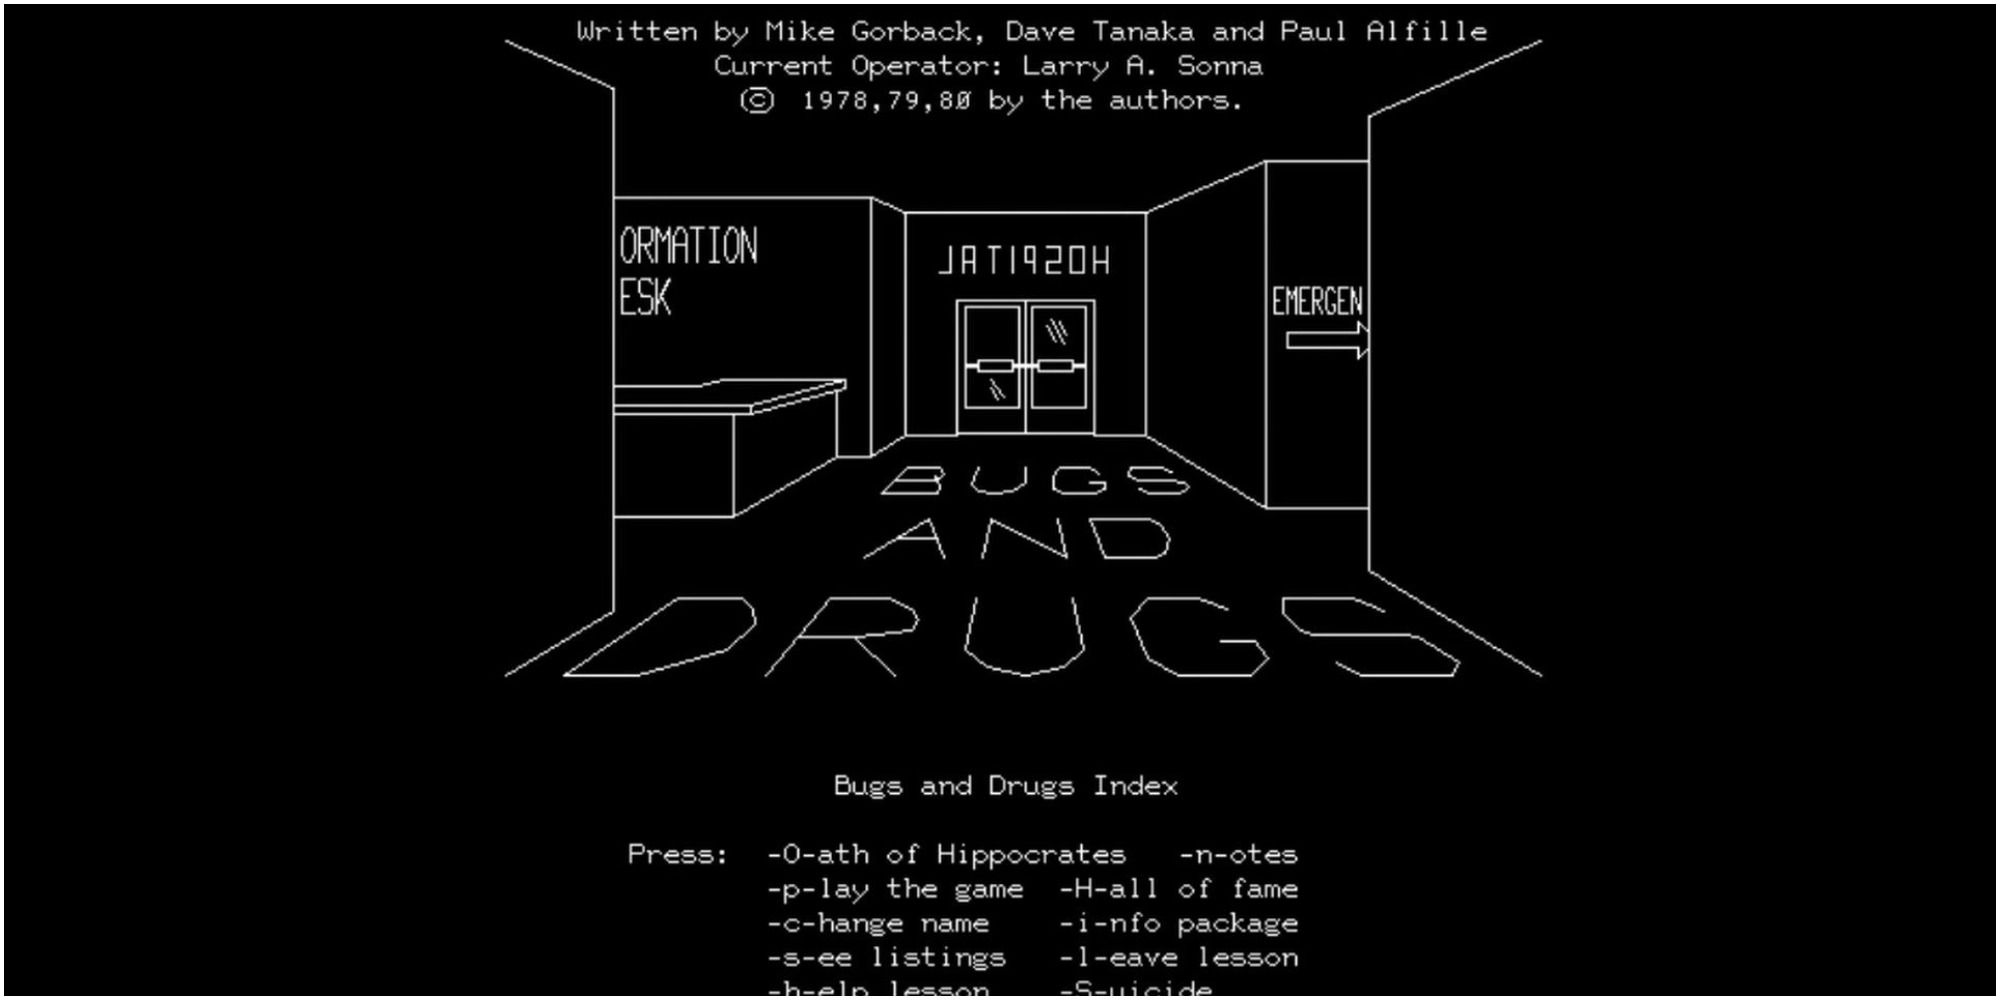 The title screen of Bugs and Drugs for the PLATO system.